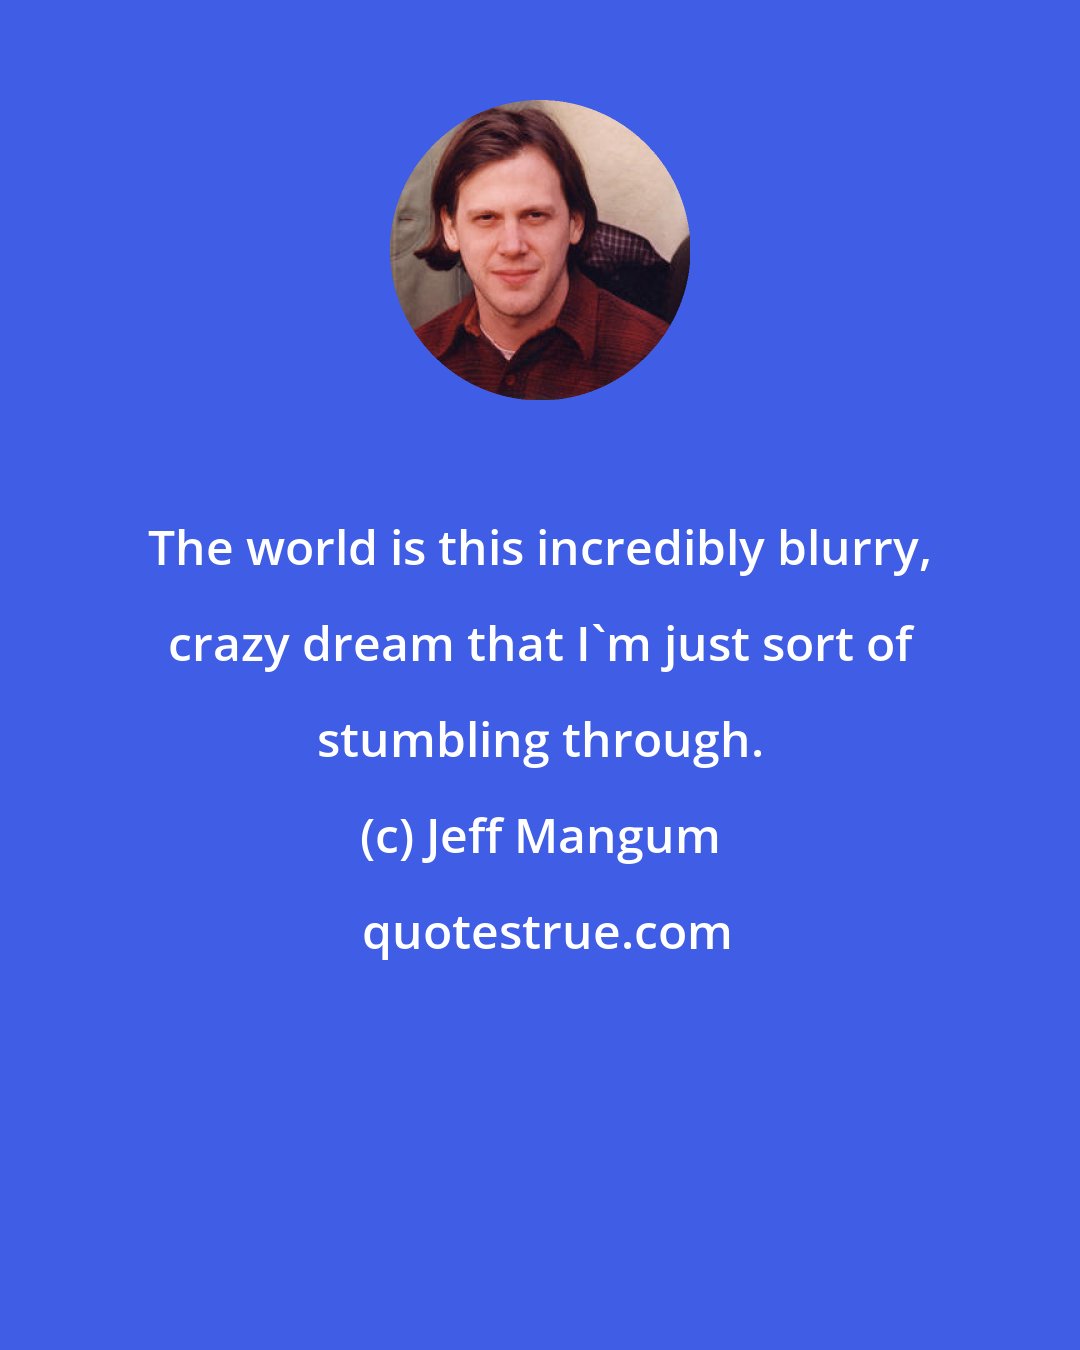 Jeff Mangum: The world is this incredibly blurry, crazy dream that I'm just sort of stumbling through.